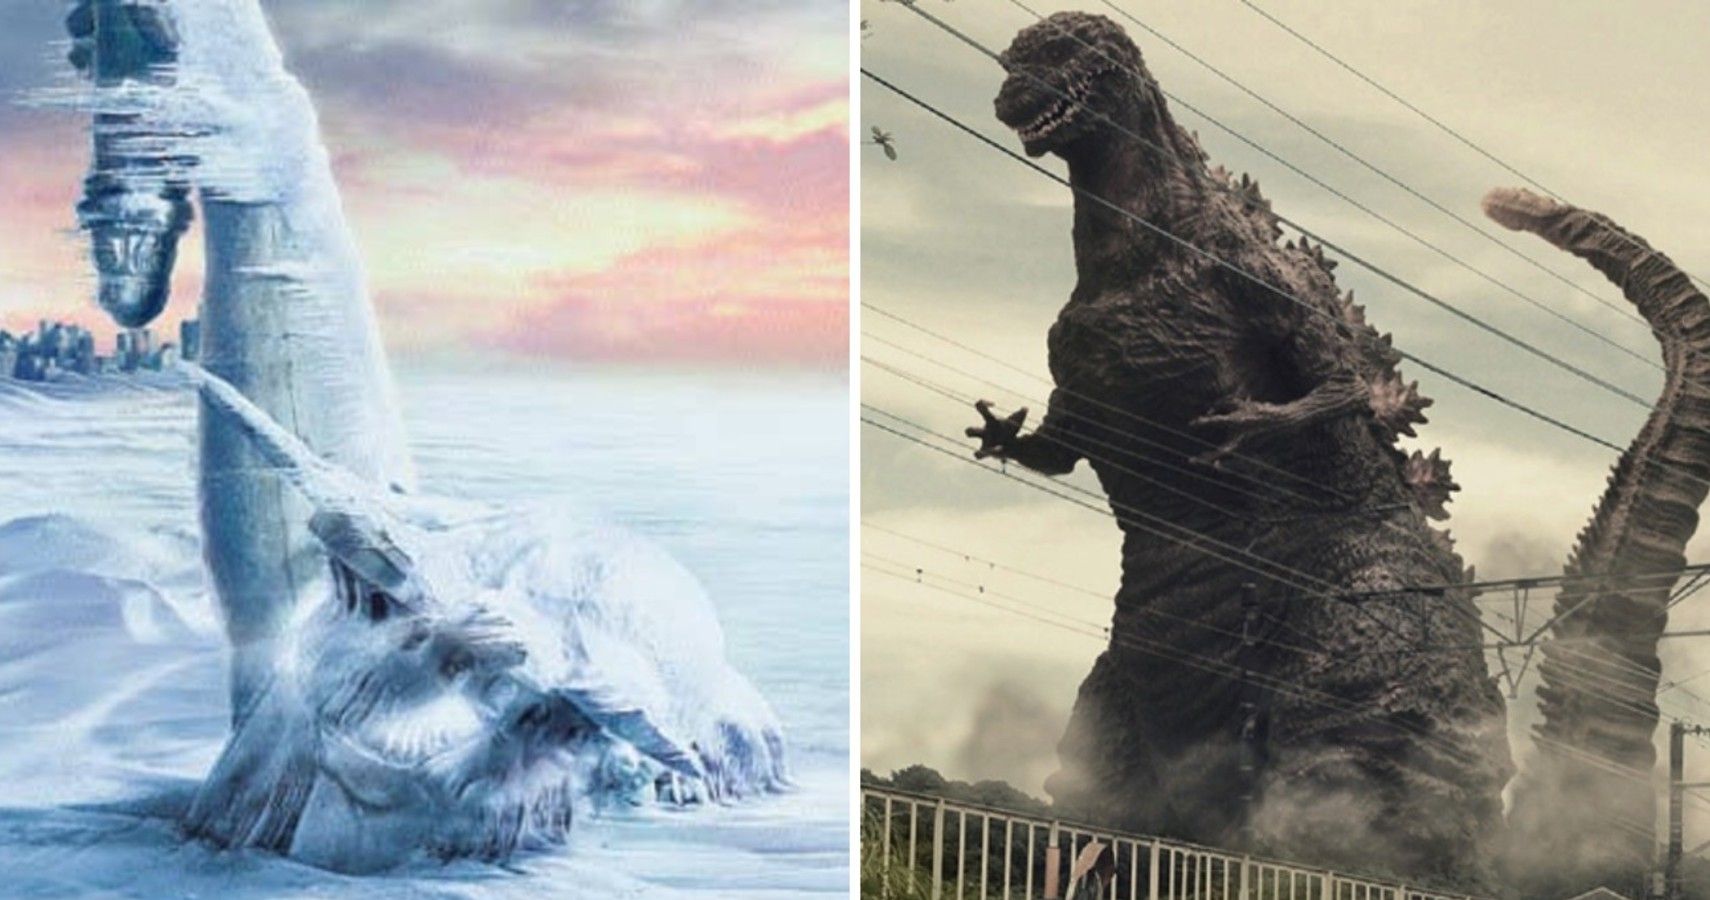 The 10 Deadliest Fictional Disasters In Movies, Ranked